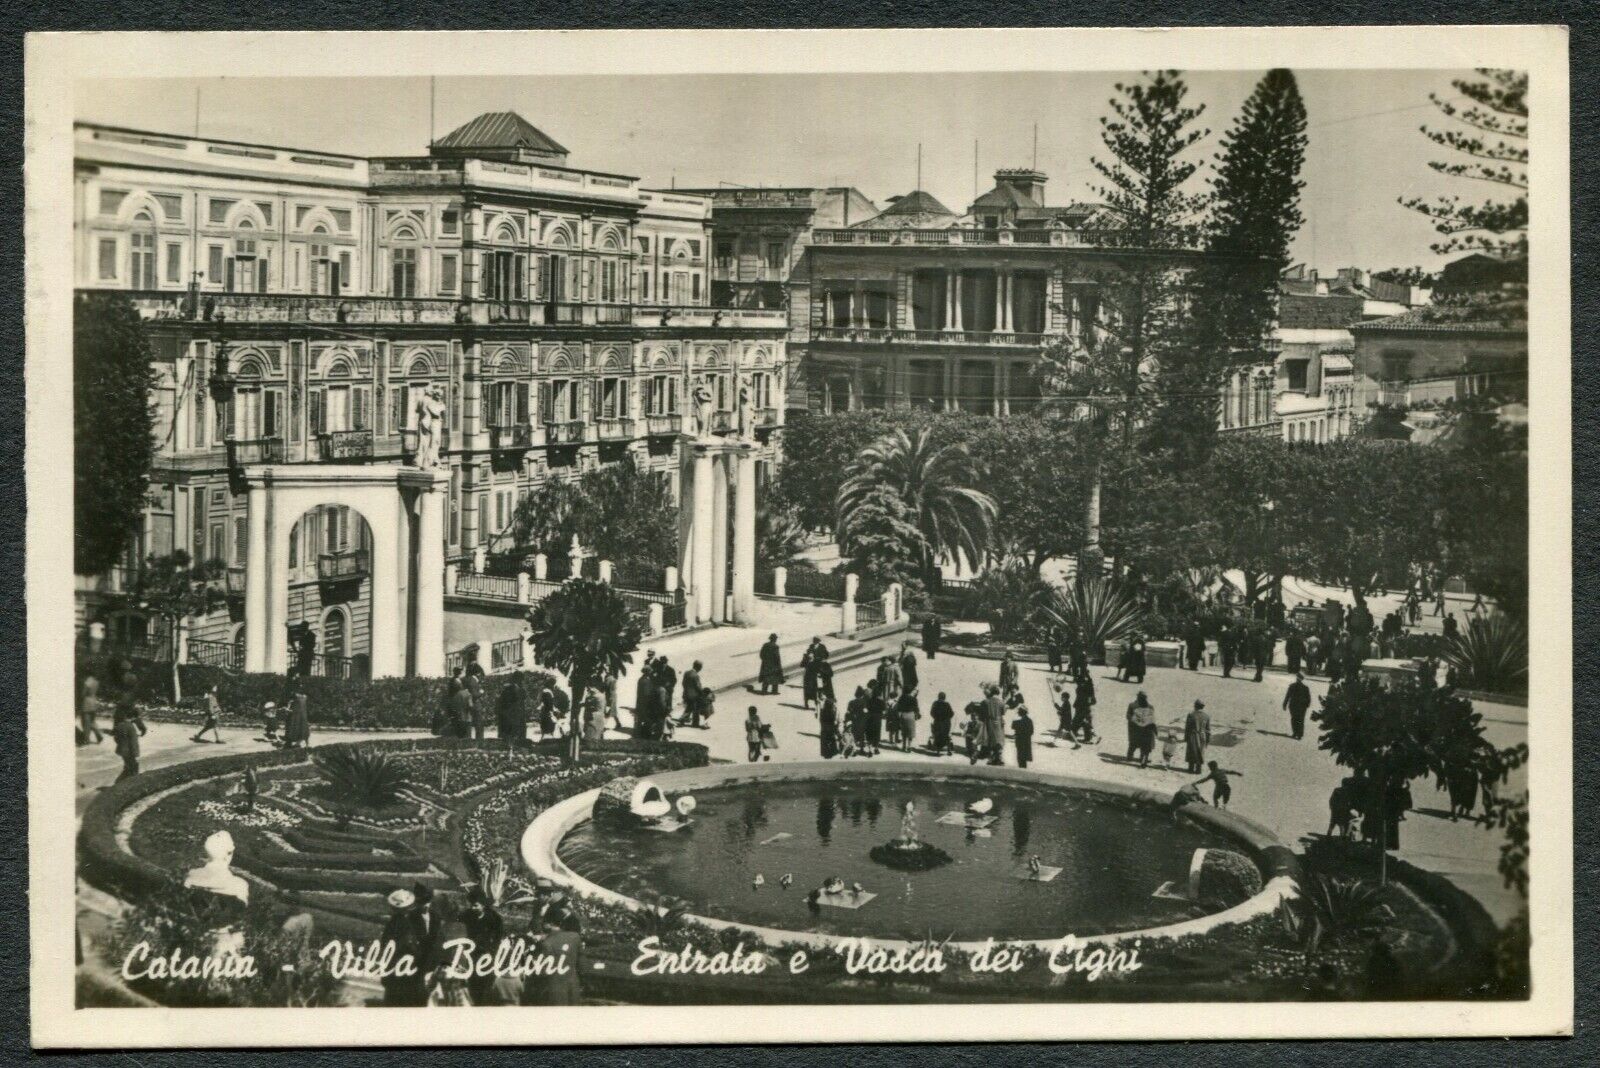 ITALY FASCIST ERA POSTCARD - Greeting from CATANIA mailed New Year\'s Eve 1942-43